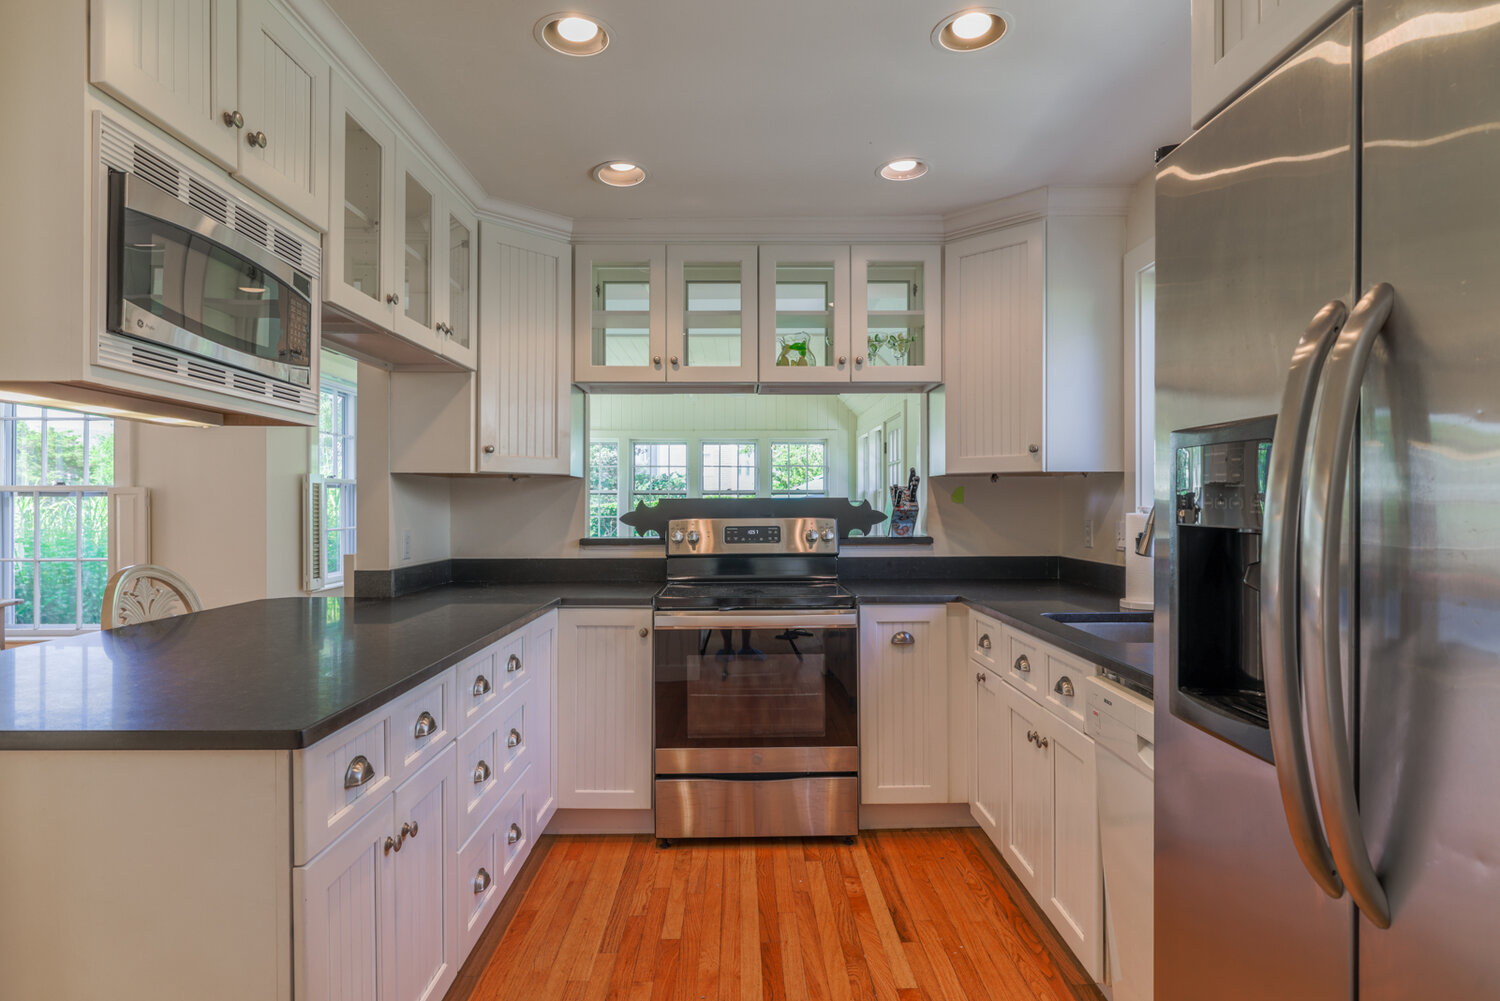 The modern kitchen has stainless-steel appliances by GE, black granite countertops and plenty of cabinets for storage.